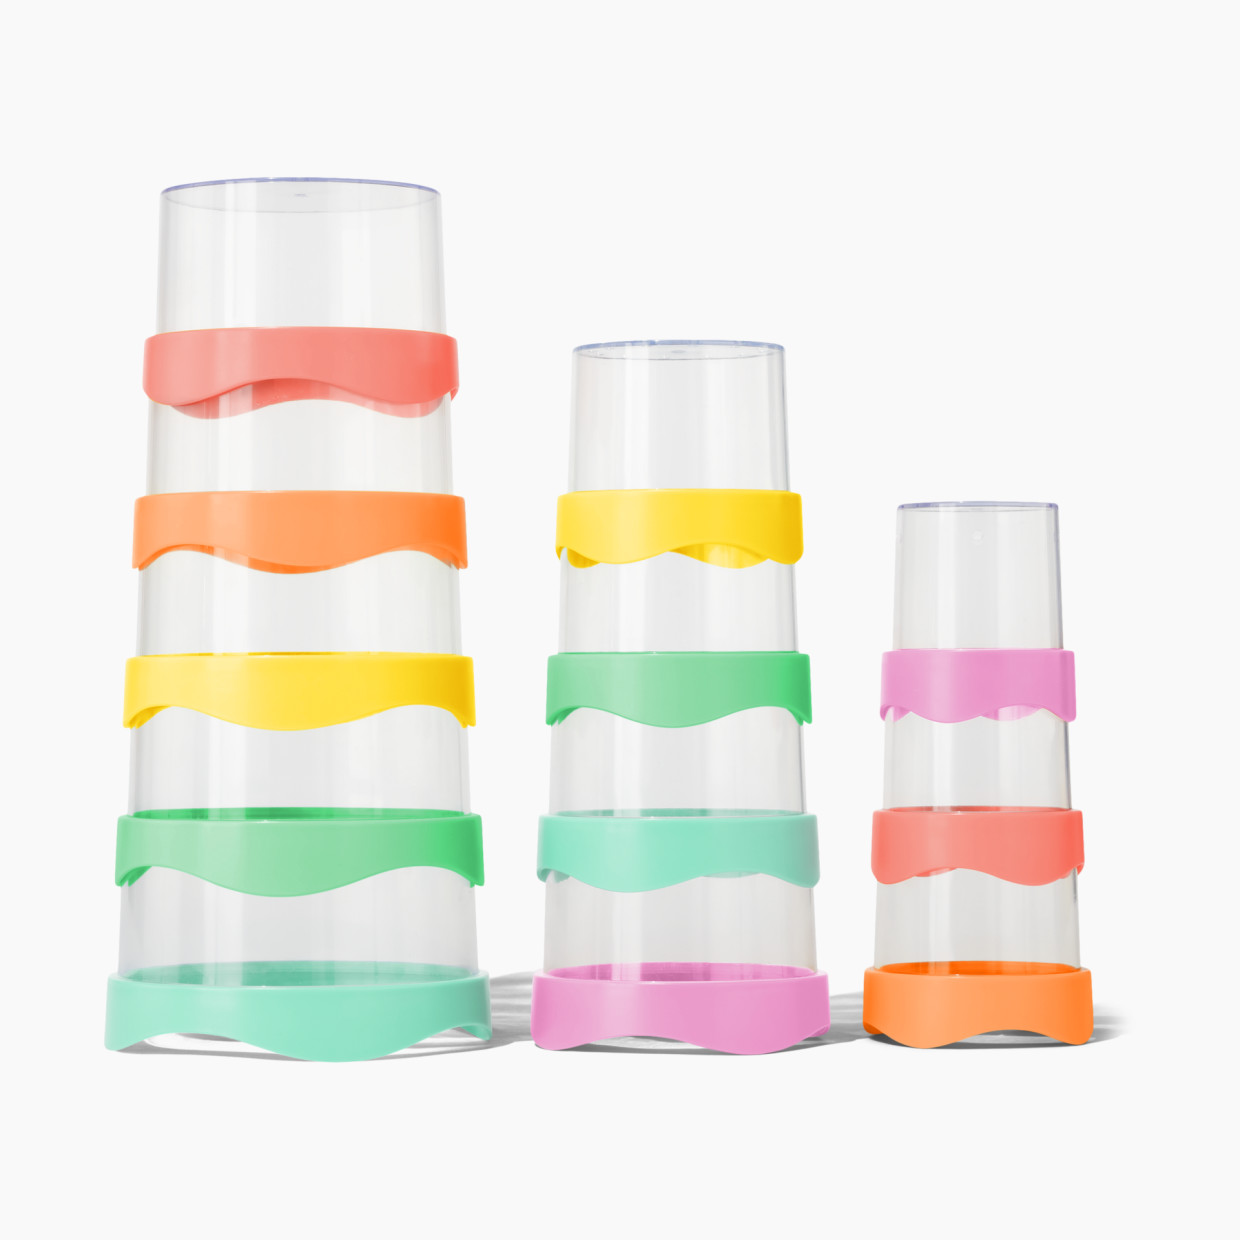 Lovevery Drip Drop Cups, Set of 12 Cups - 10 Months+.